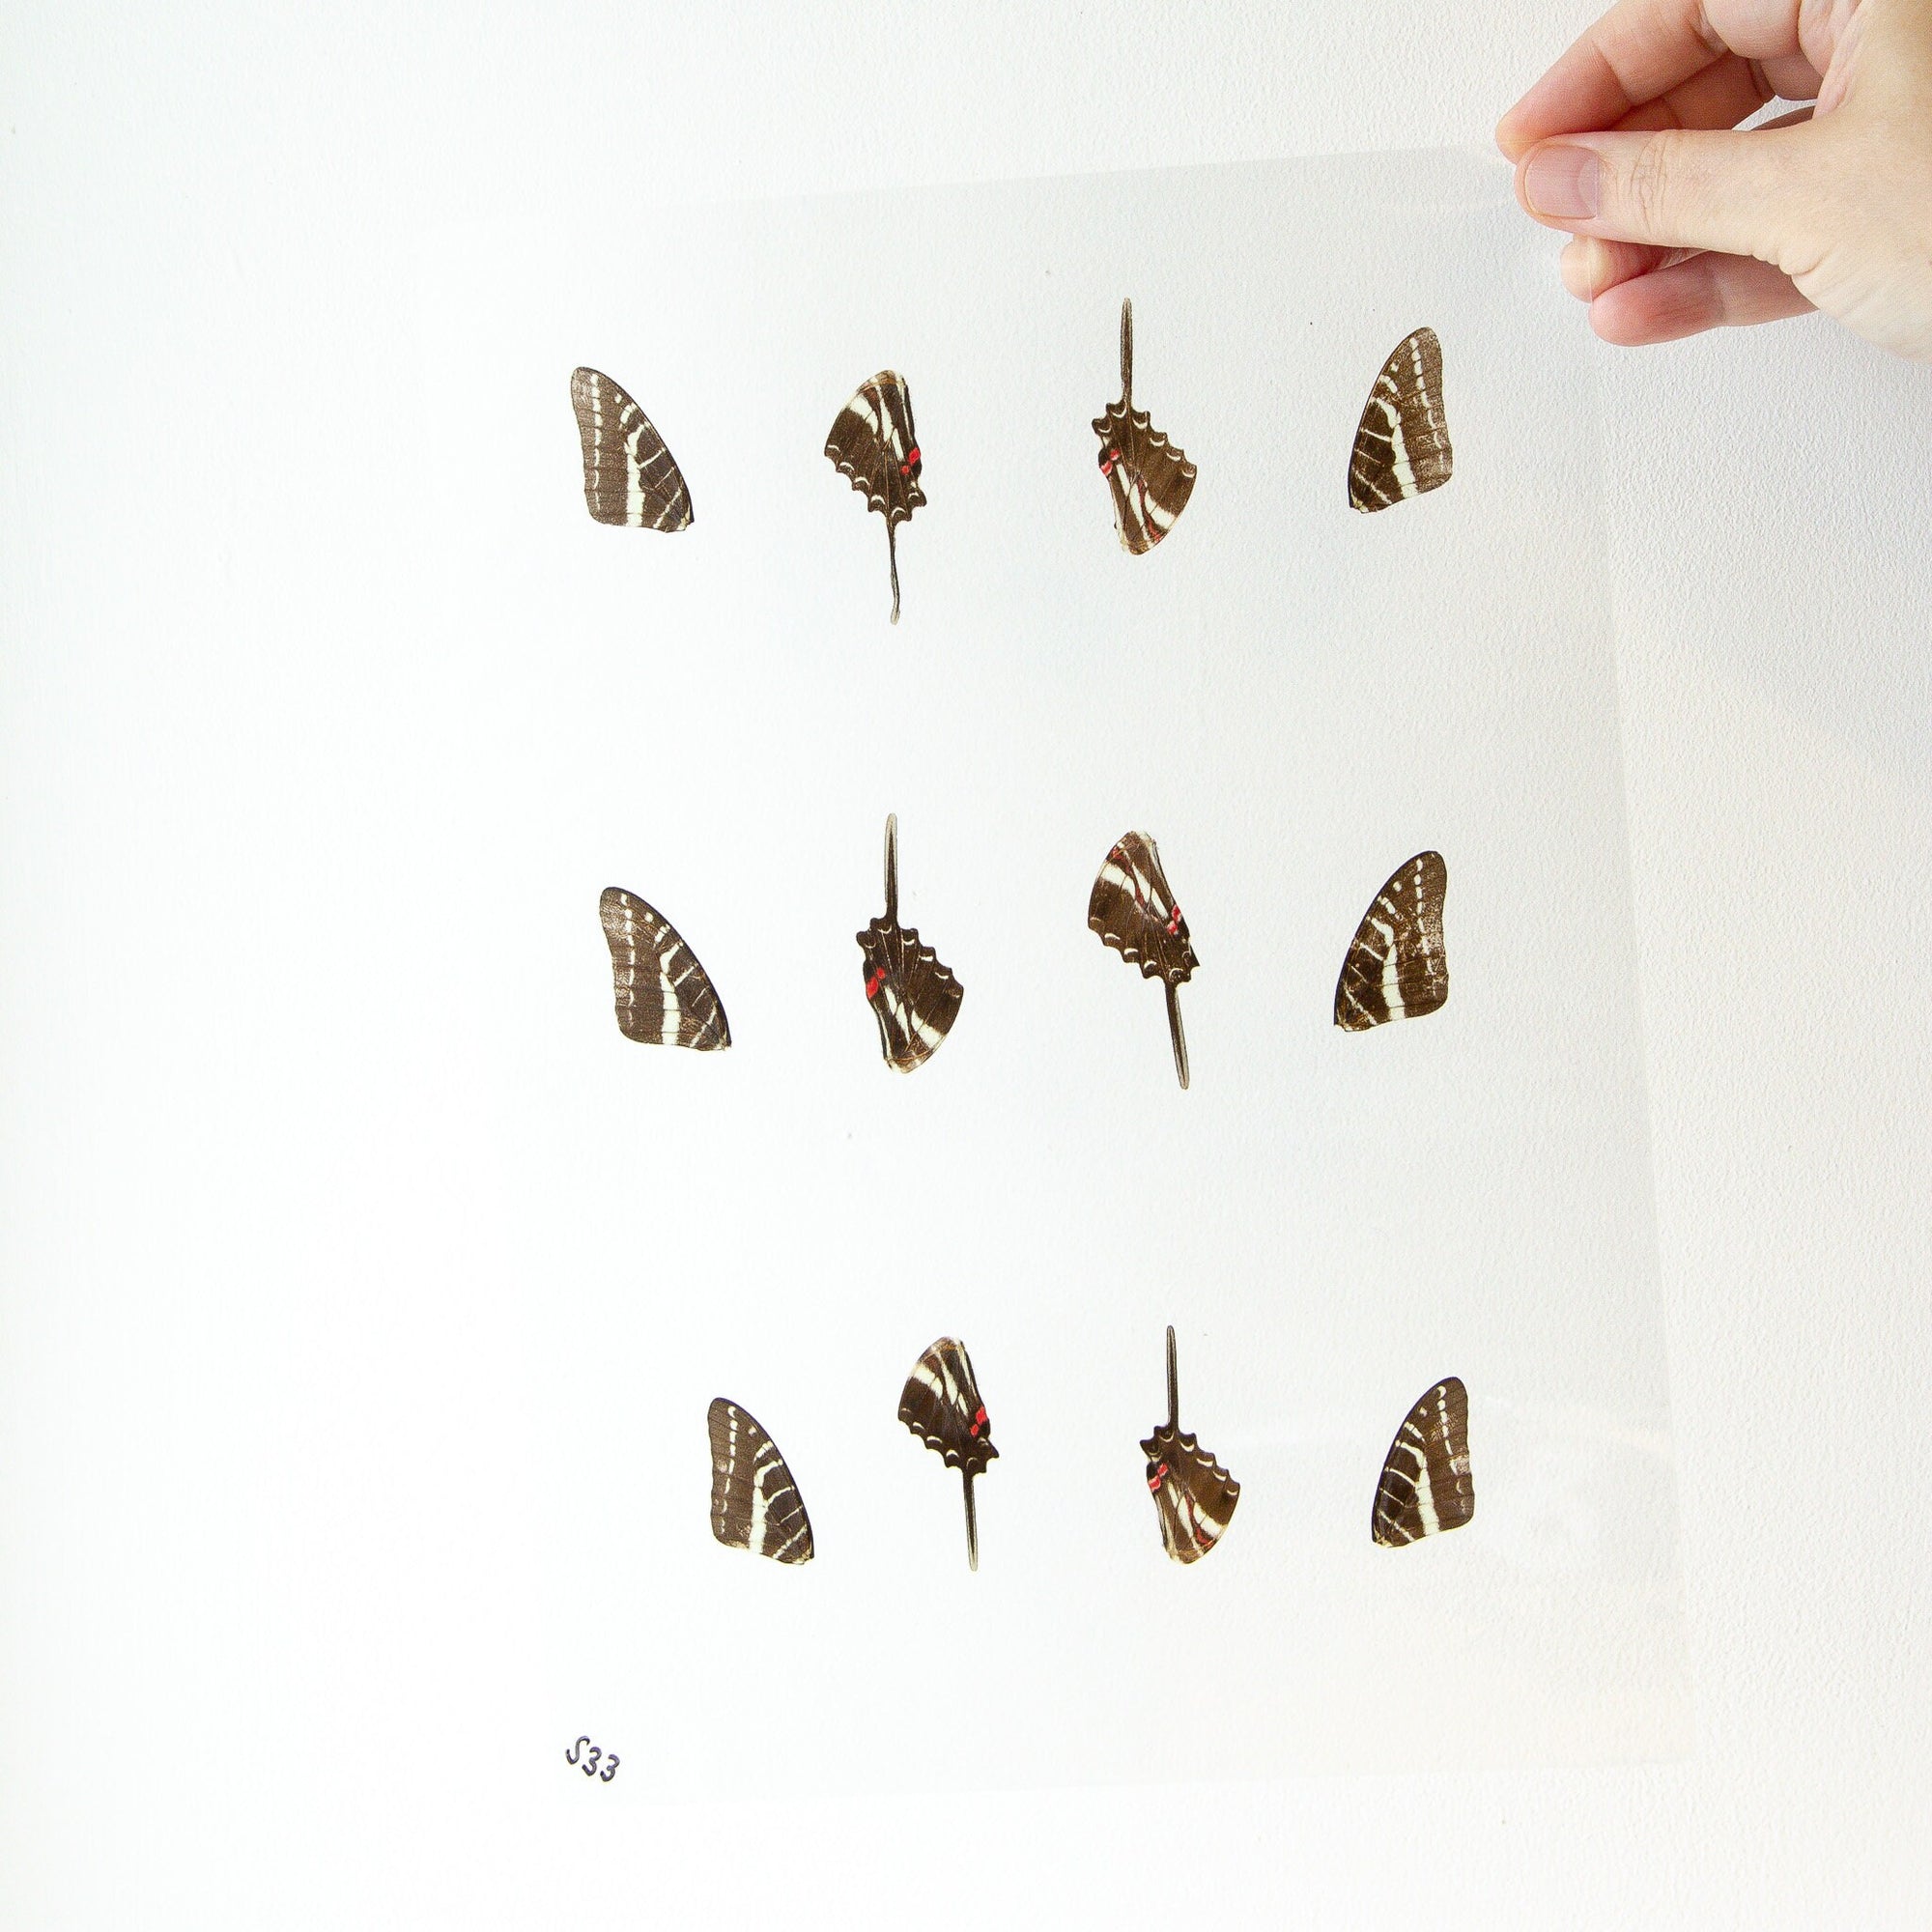 Butterfly Wings GLOSSY LAMINATED SHEET Real Ethically Sourced Specimens Moths Butterflies Wings for Art -- S33